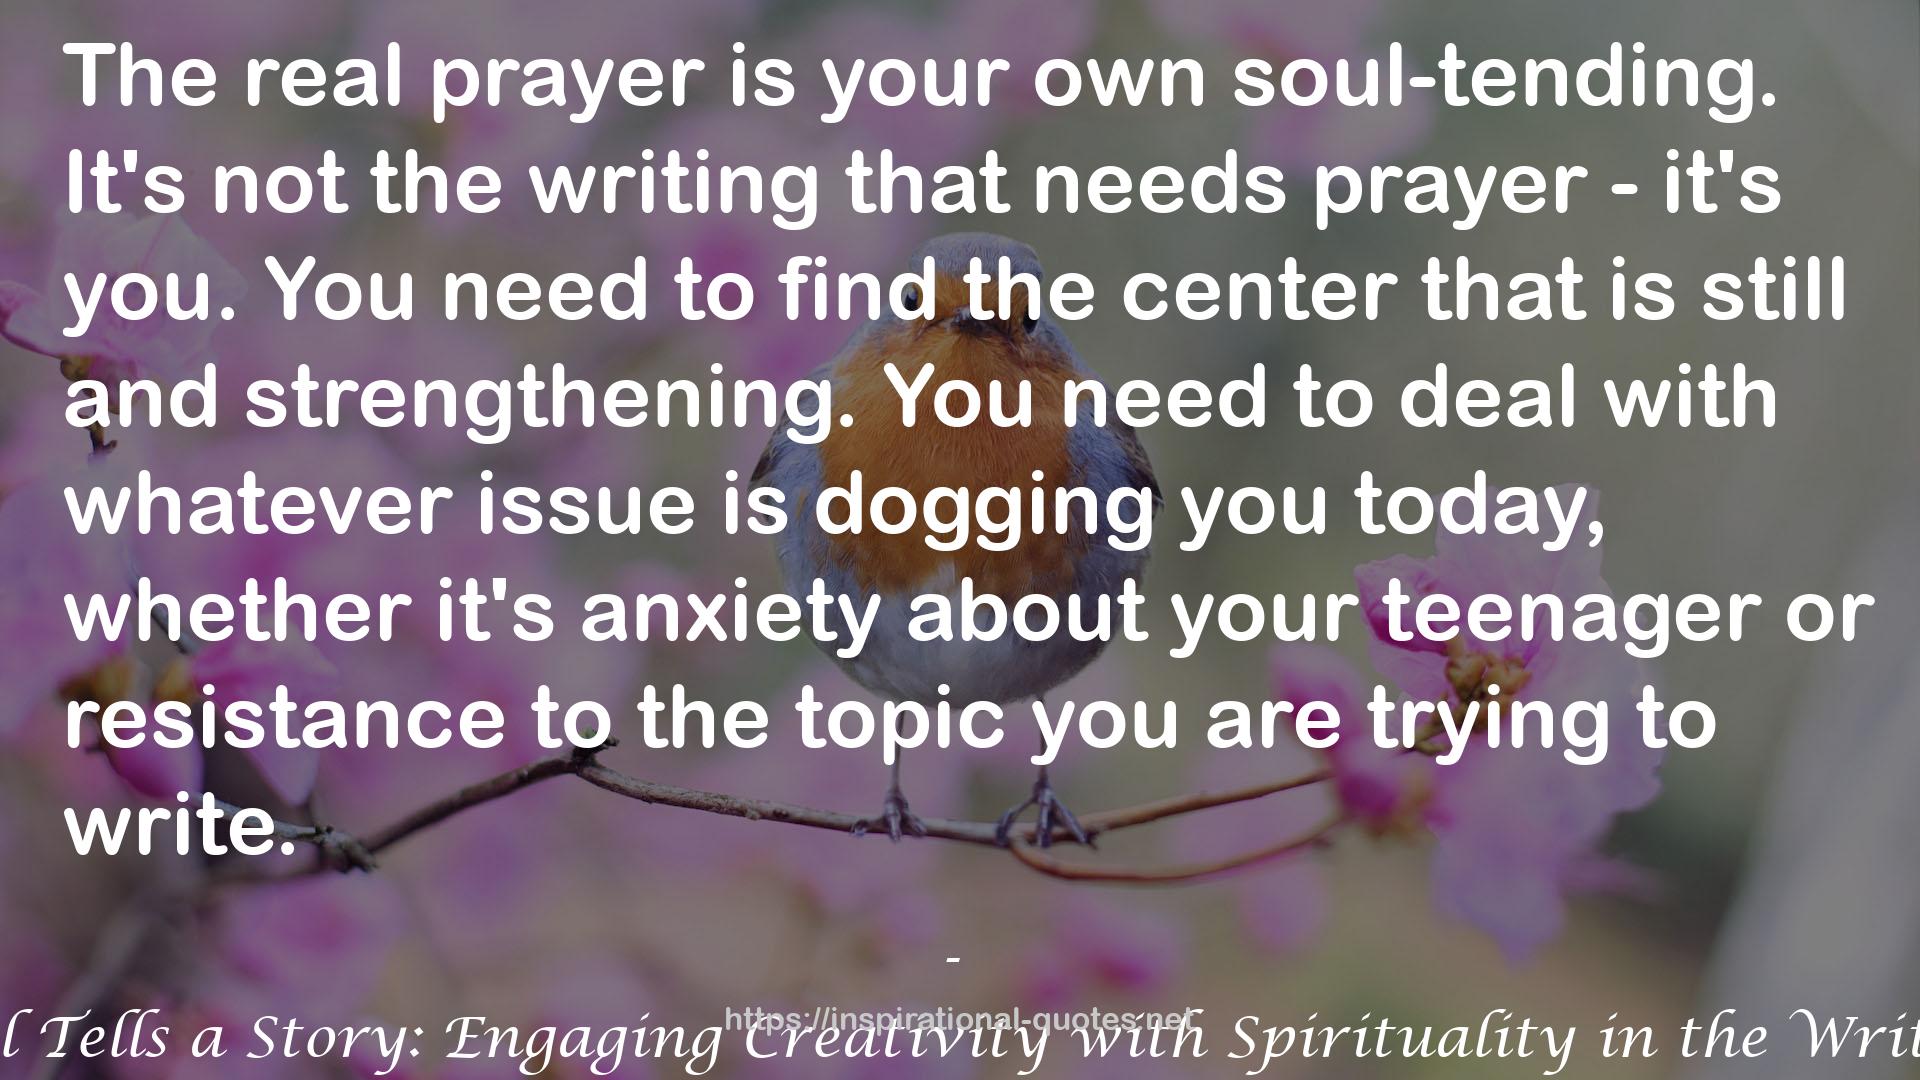 The Soul Tells a Story: Engaging Creativity with Spirituality in the Writing Life QUOTES